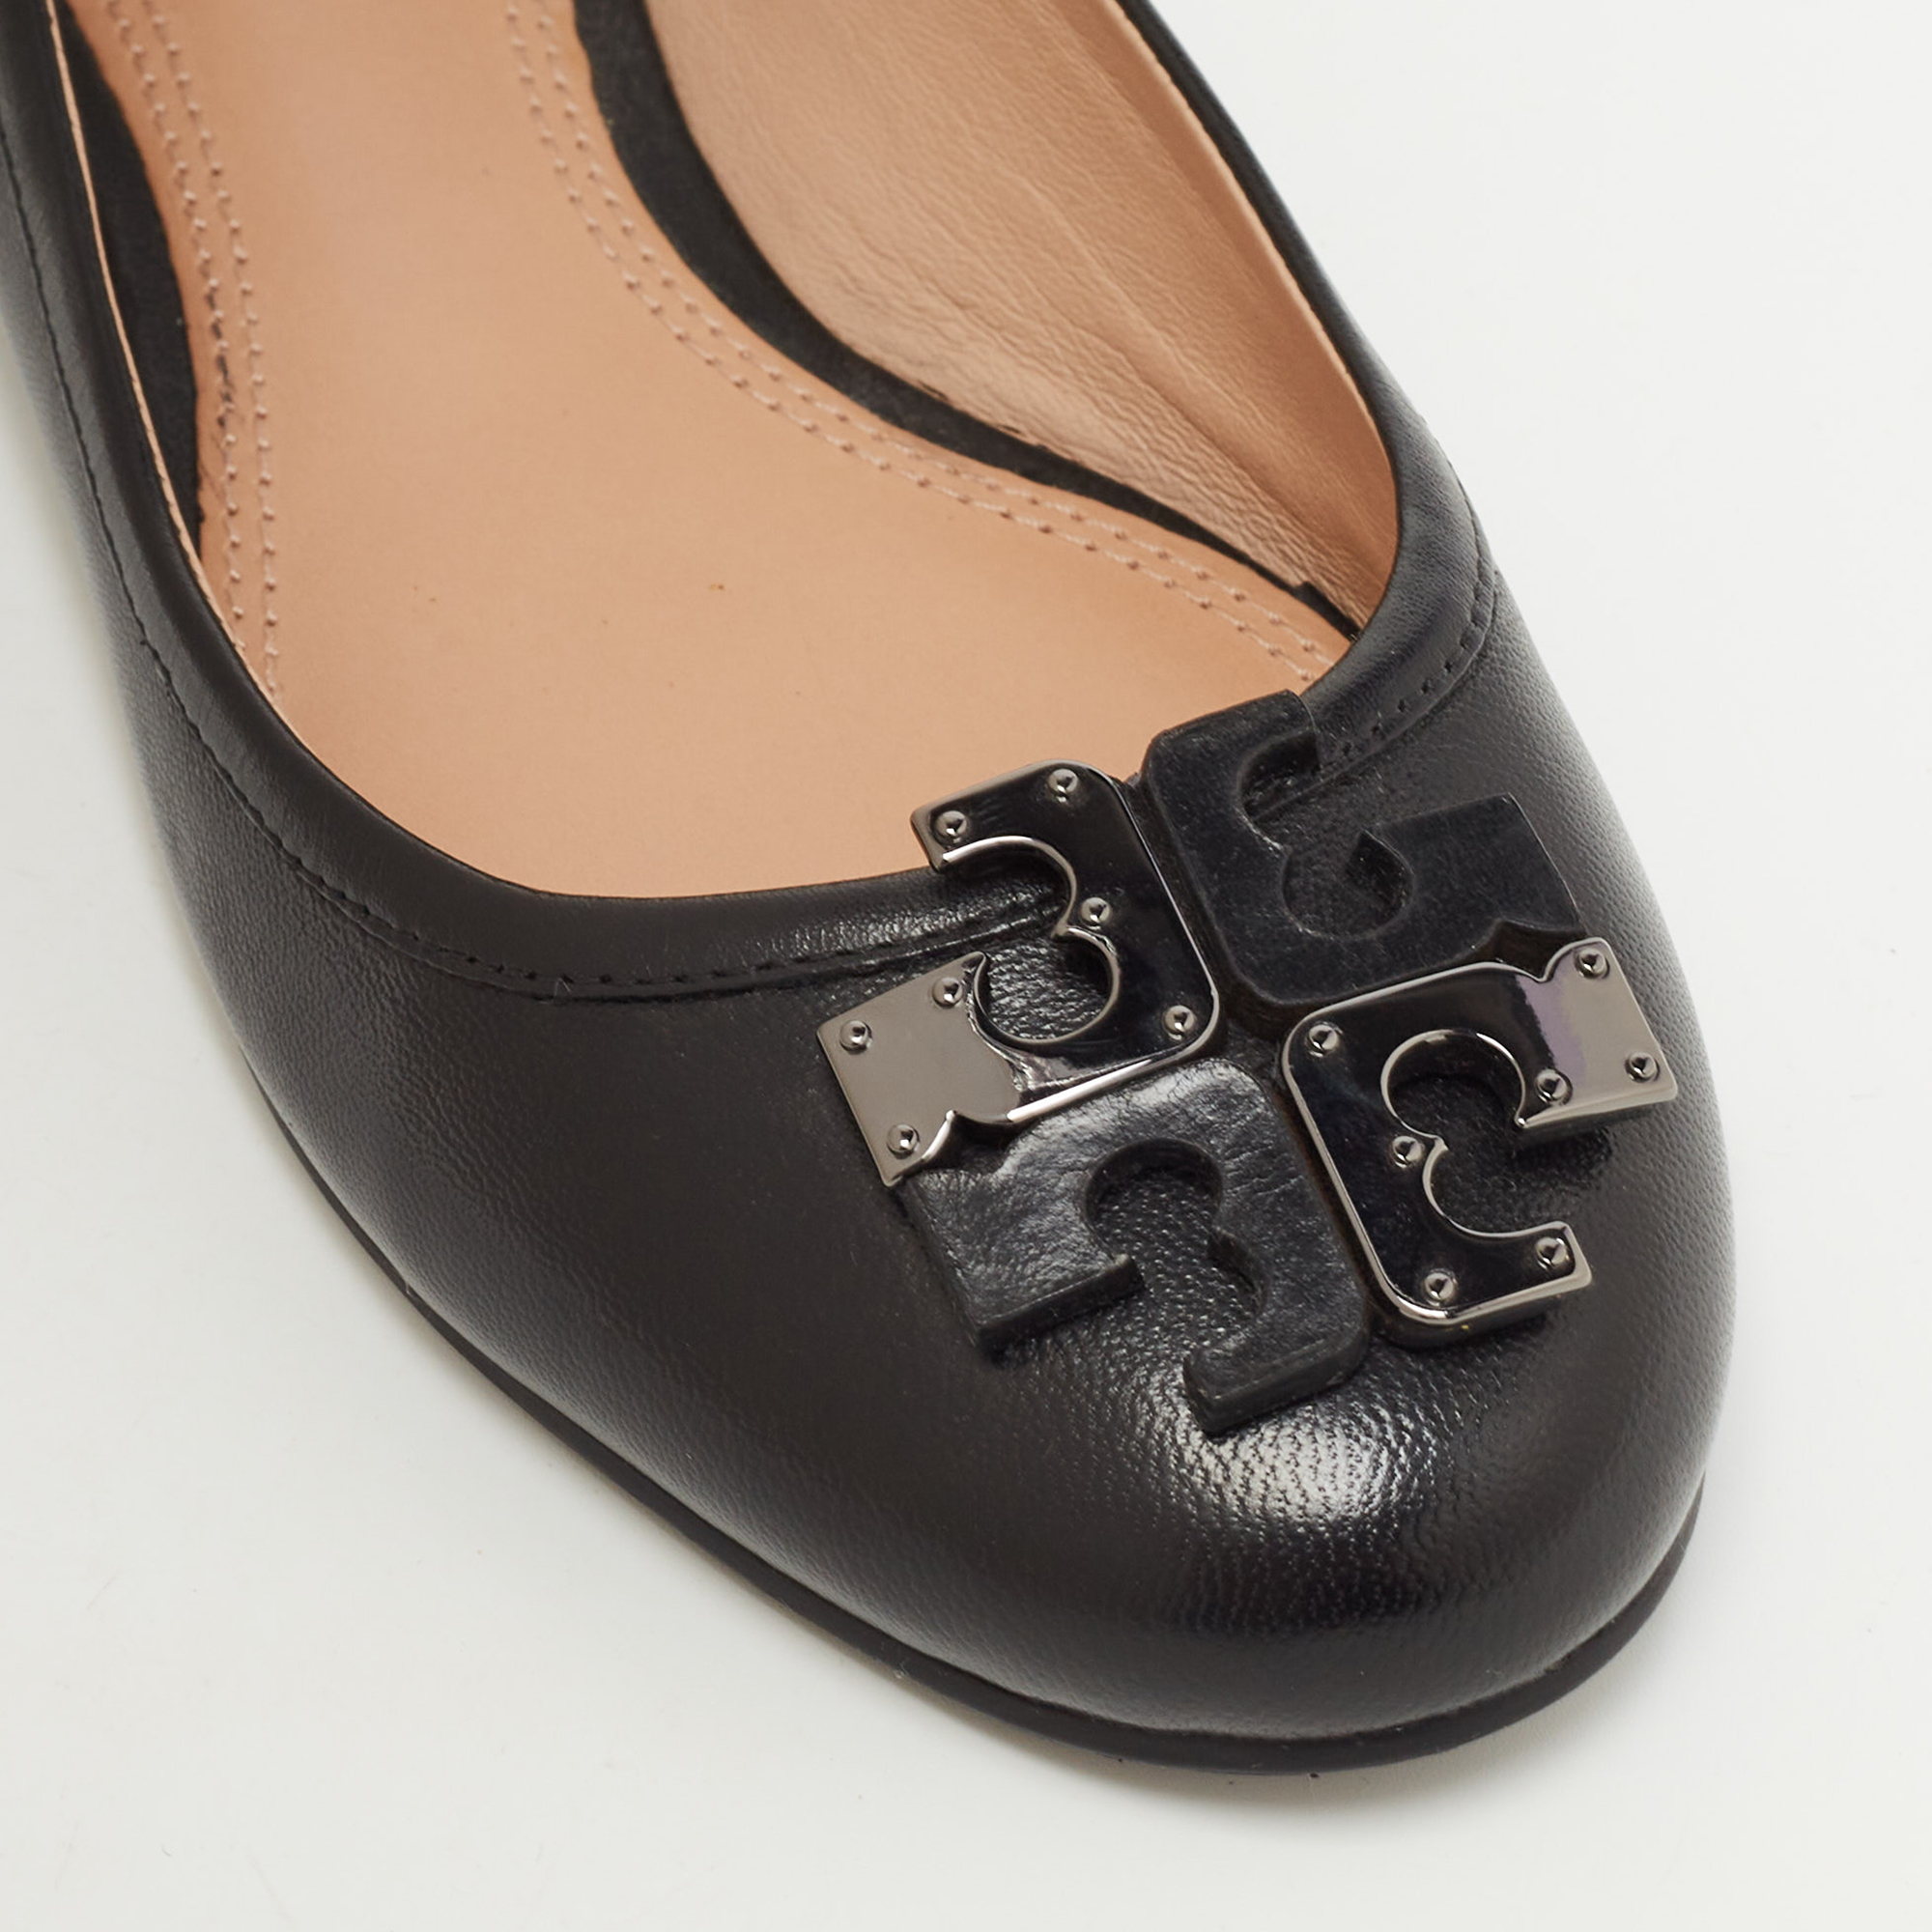 Tory Burch Black Leather Lowell Ballet Flats Size 38.5